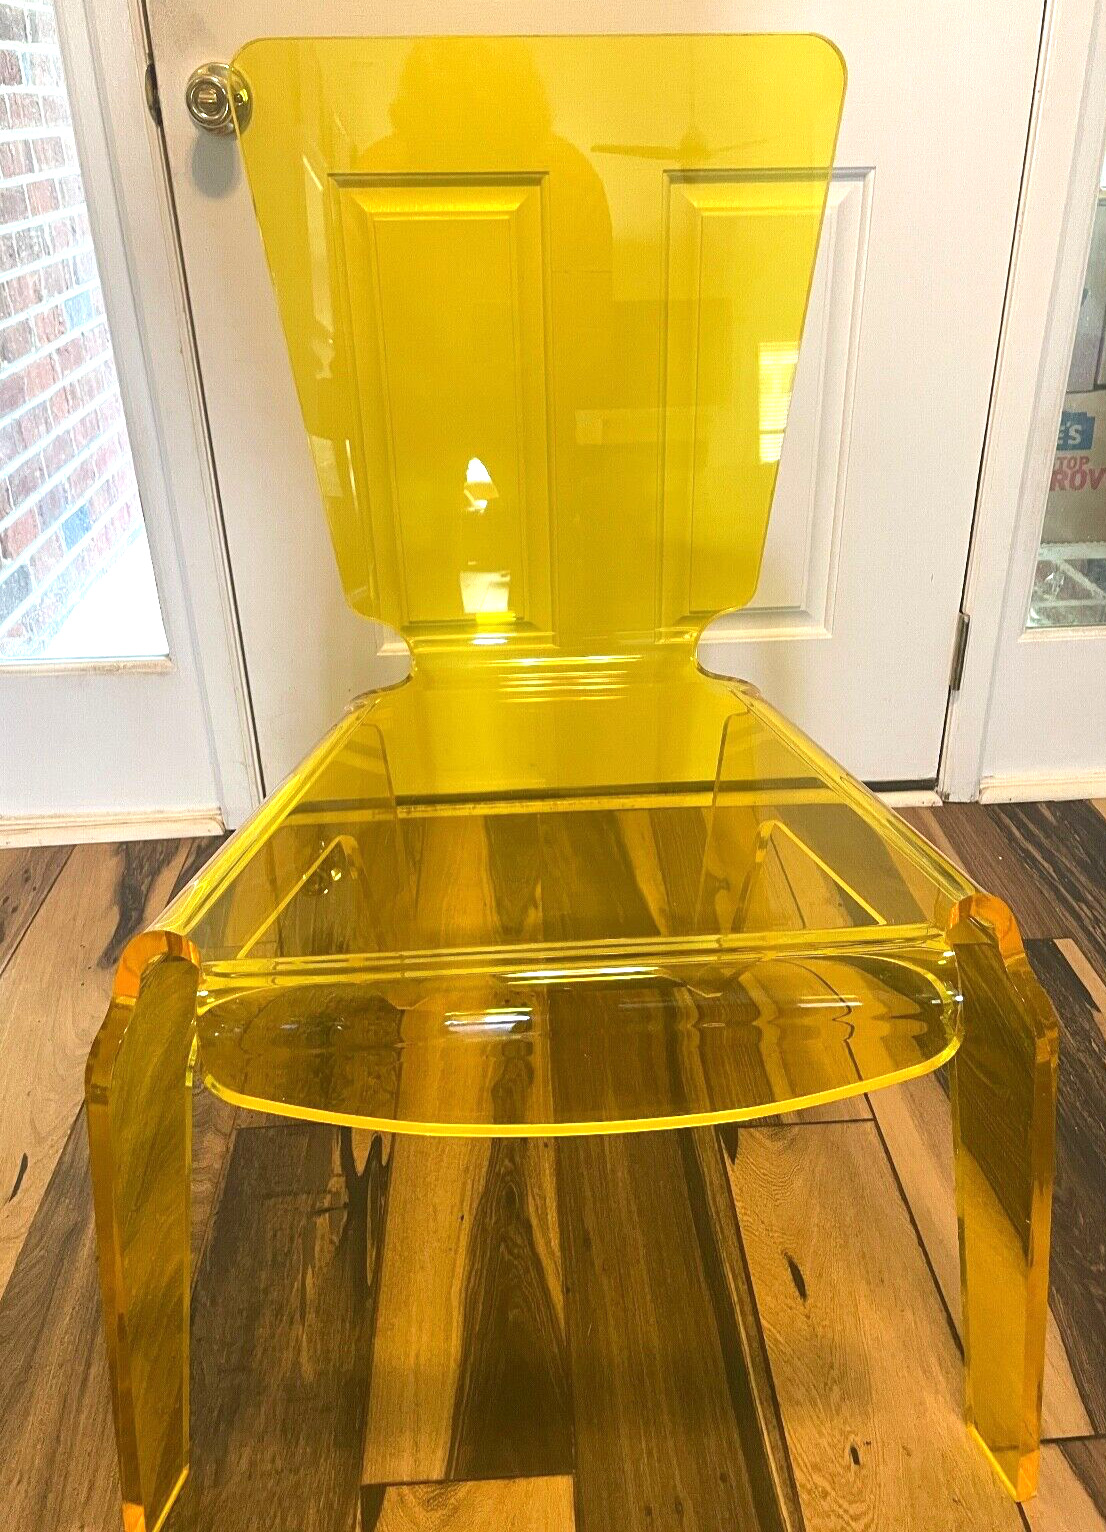 MCM Yellow Lucite /acrylic Molded Chair 3 x 2 x 2 ft. ½ inch thick Vintage Rare